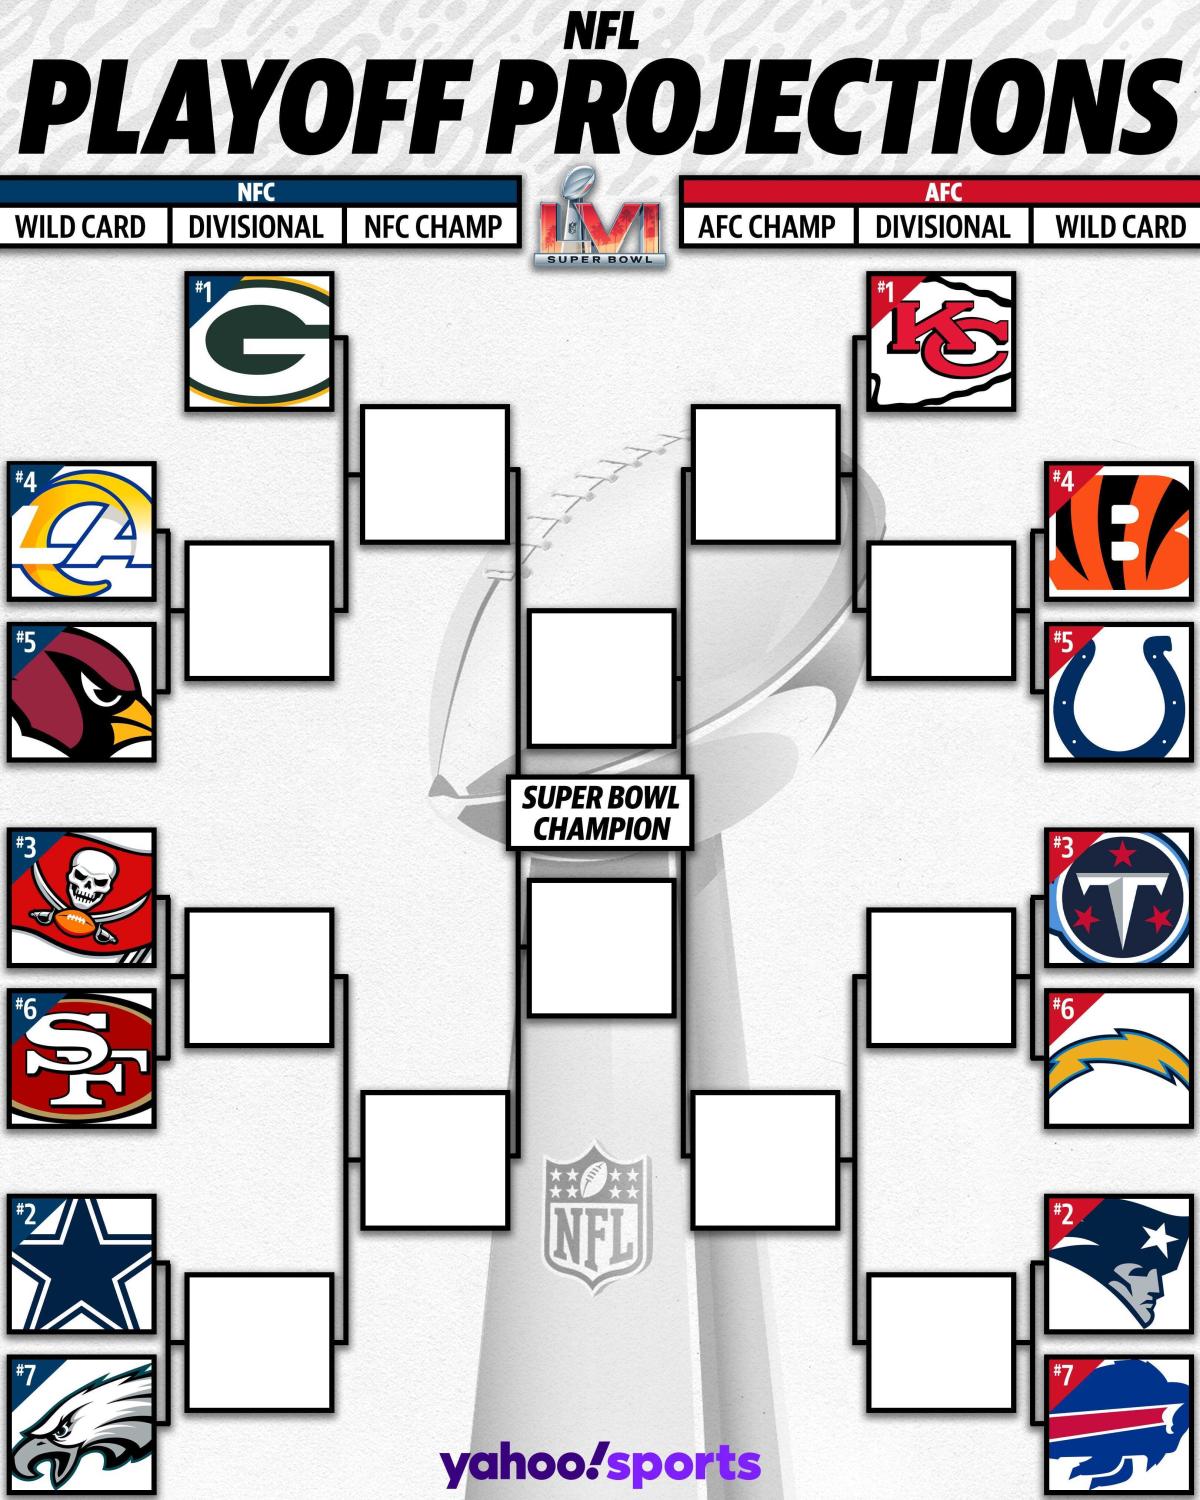 NFL playoff bracket 2021: Full schedule, TV channels, scores for AFC & NFC  games